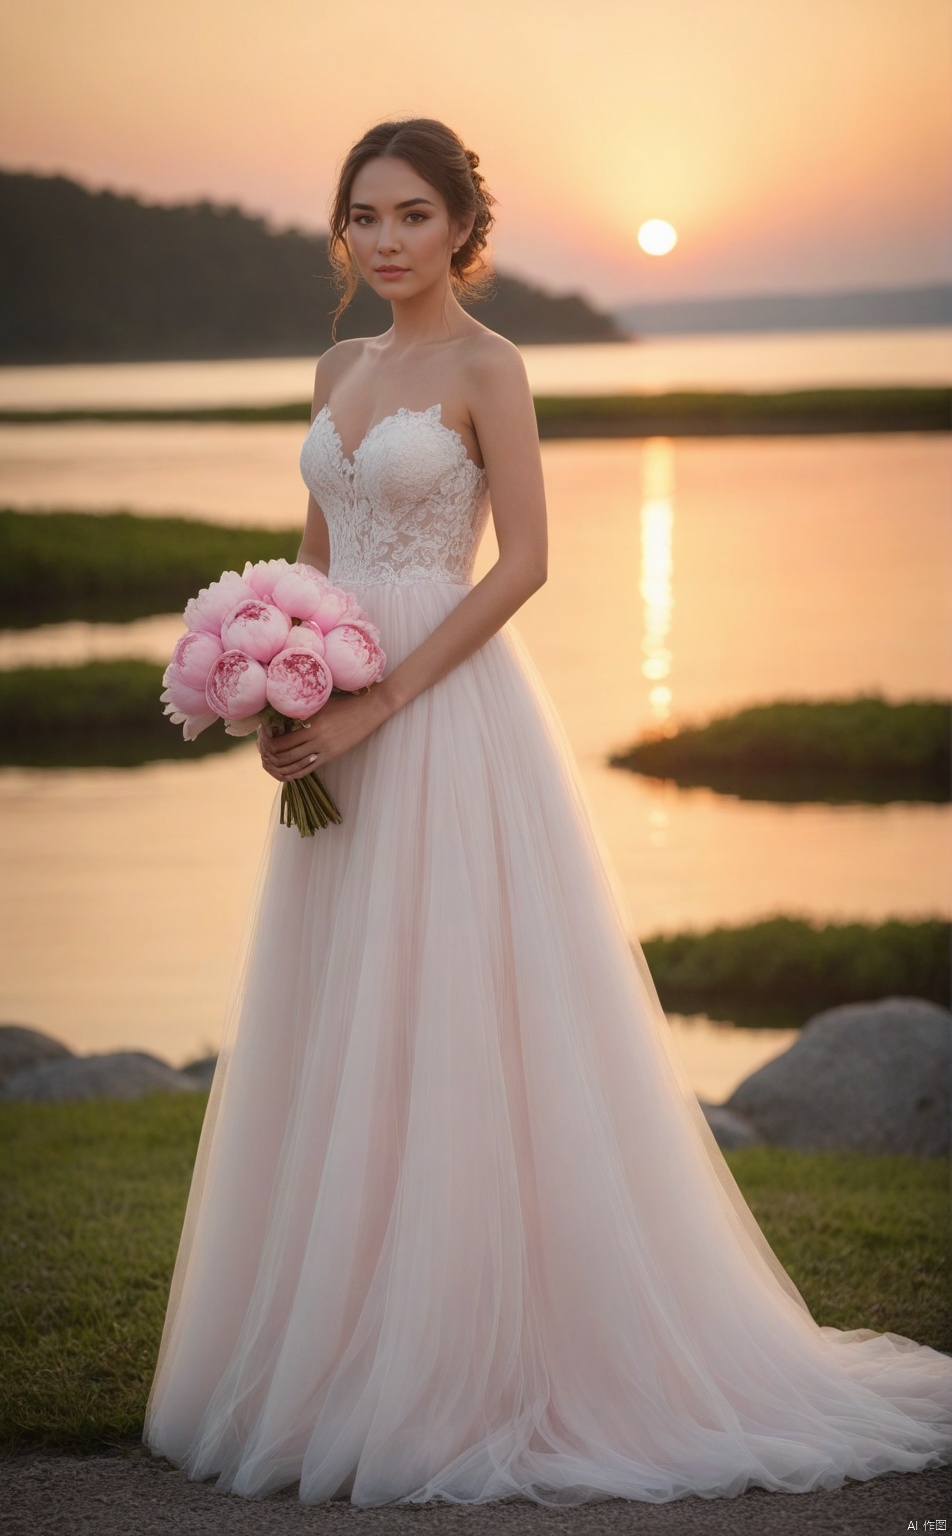  masterpiece, dreamy_waterfront_wedding_gown_photography, 10K resolution, (ethereal_romance:1.3), delicate_details, soft_lighting,
1 bride, wearing_a_lace_and_tulle_ball_gown, holding_bouquet_of_peonies, standing_by_the_shoreline, solo_shot, flowing_hair, radiant_expression, graceful_pose, slender_build,
serene_lake_view, sunset_reflections, rippling_water, (pastel_tones:1.2),
three-quarter_view, shallow_depth_of_field, Canon EOS R5 with AI-supported lens, ISO400, f/2.8 aperture, shutter_speed_1/160s,
gossamer_dress_floating_in_breeze, character_basking_in_evening_light, capturing_the_magical_moment_of_a_bride_at_water's_edge., girl